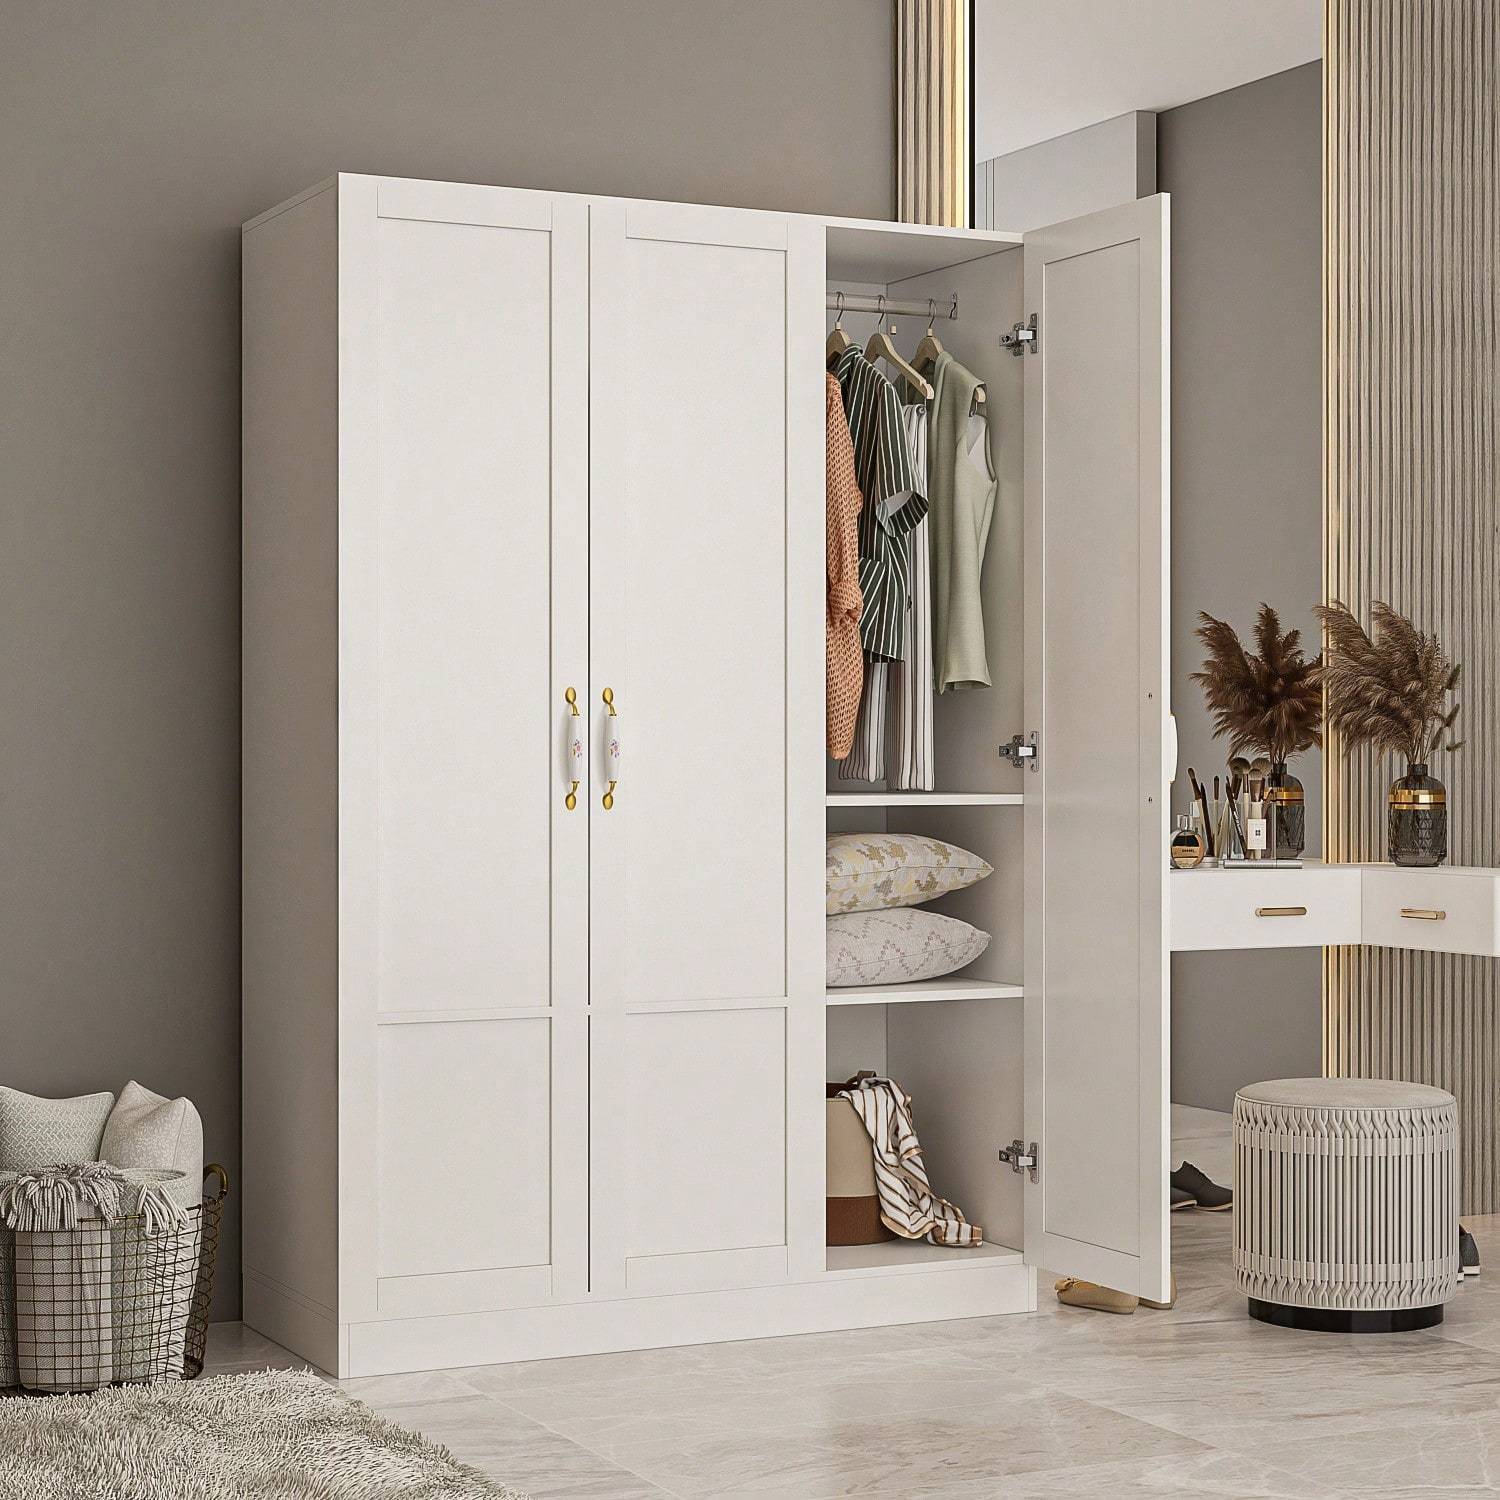 

Large Wardrobe Armoire Wooden Closet With 3 Doors, 5 Storage Compartments, 2 Hanging Rods & Decorative Handles For Bedroom, White (47.2"l X 18.3"w X 69.7"h)